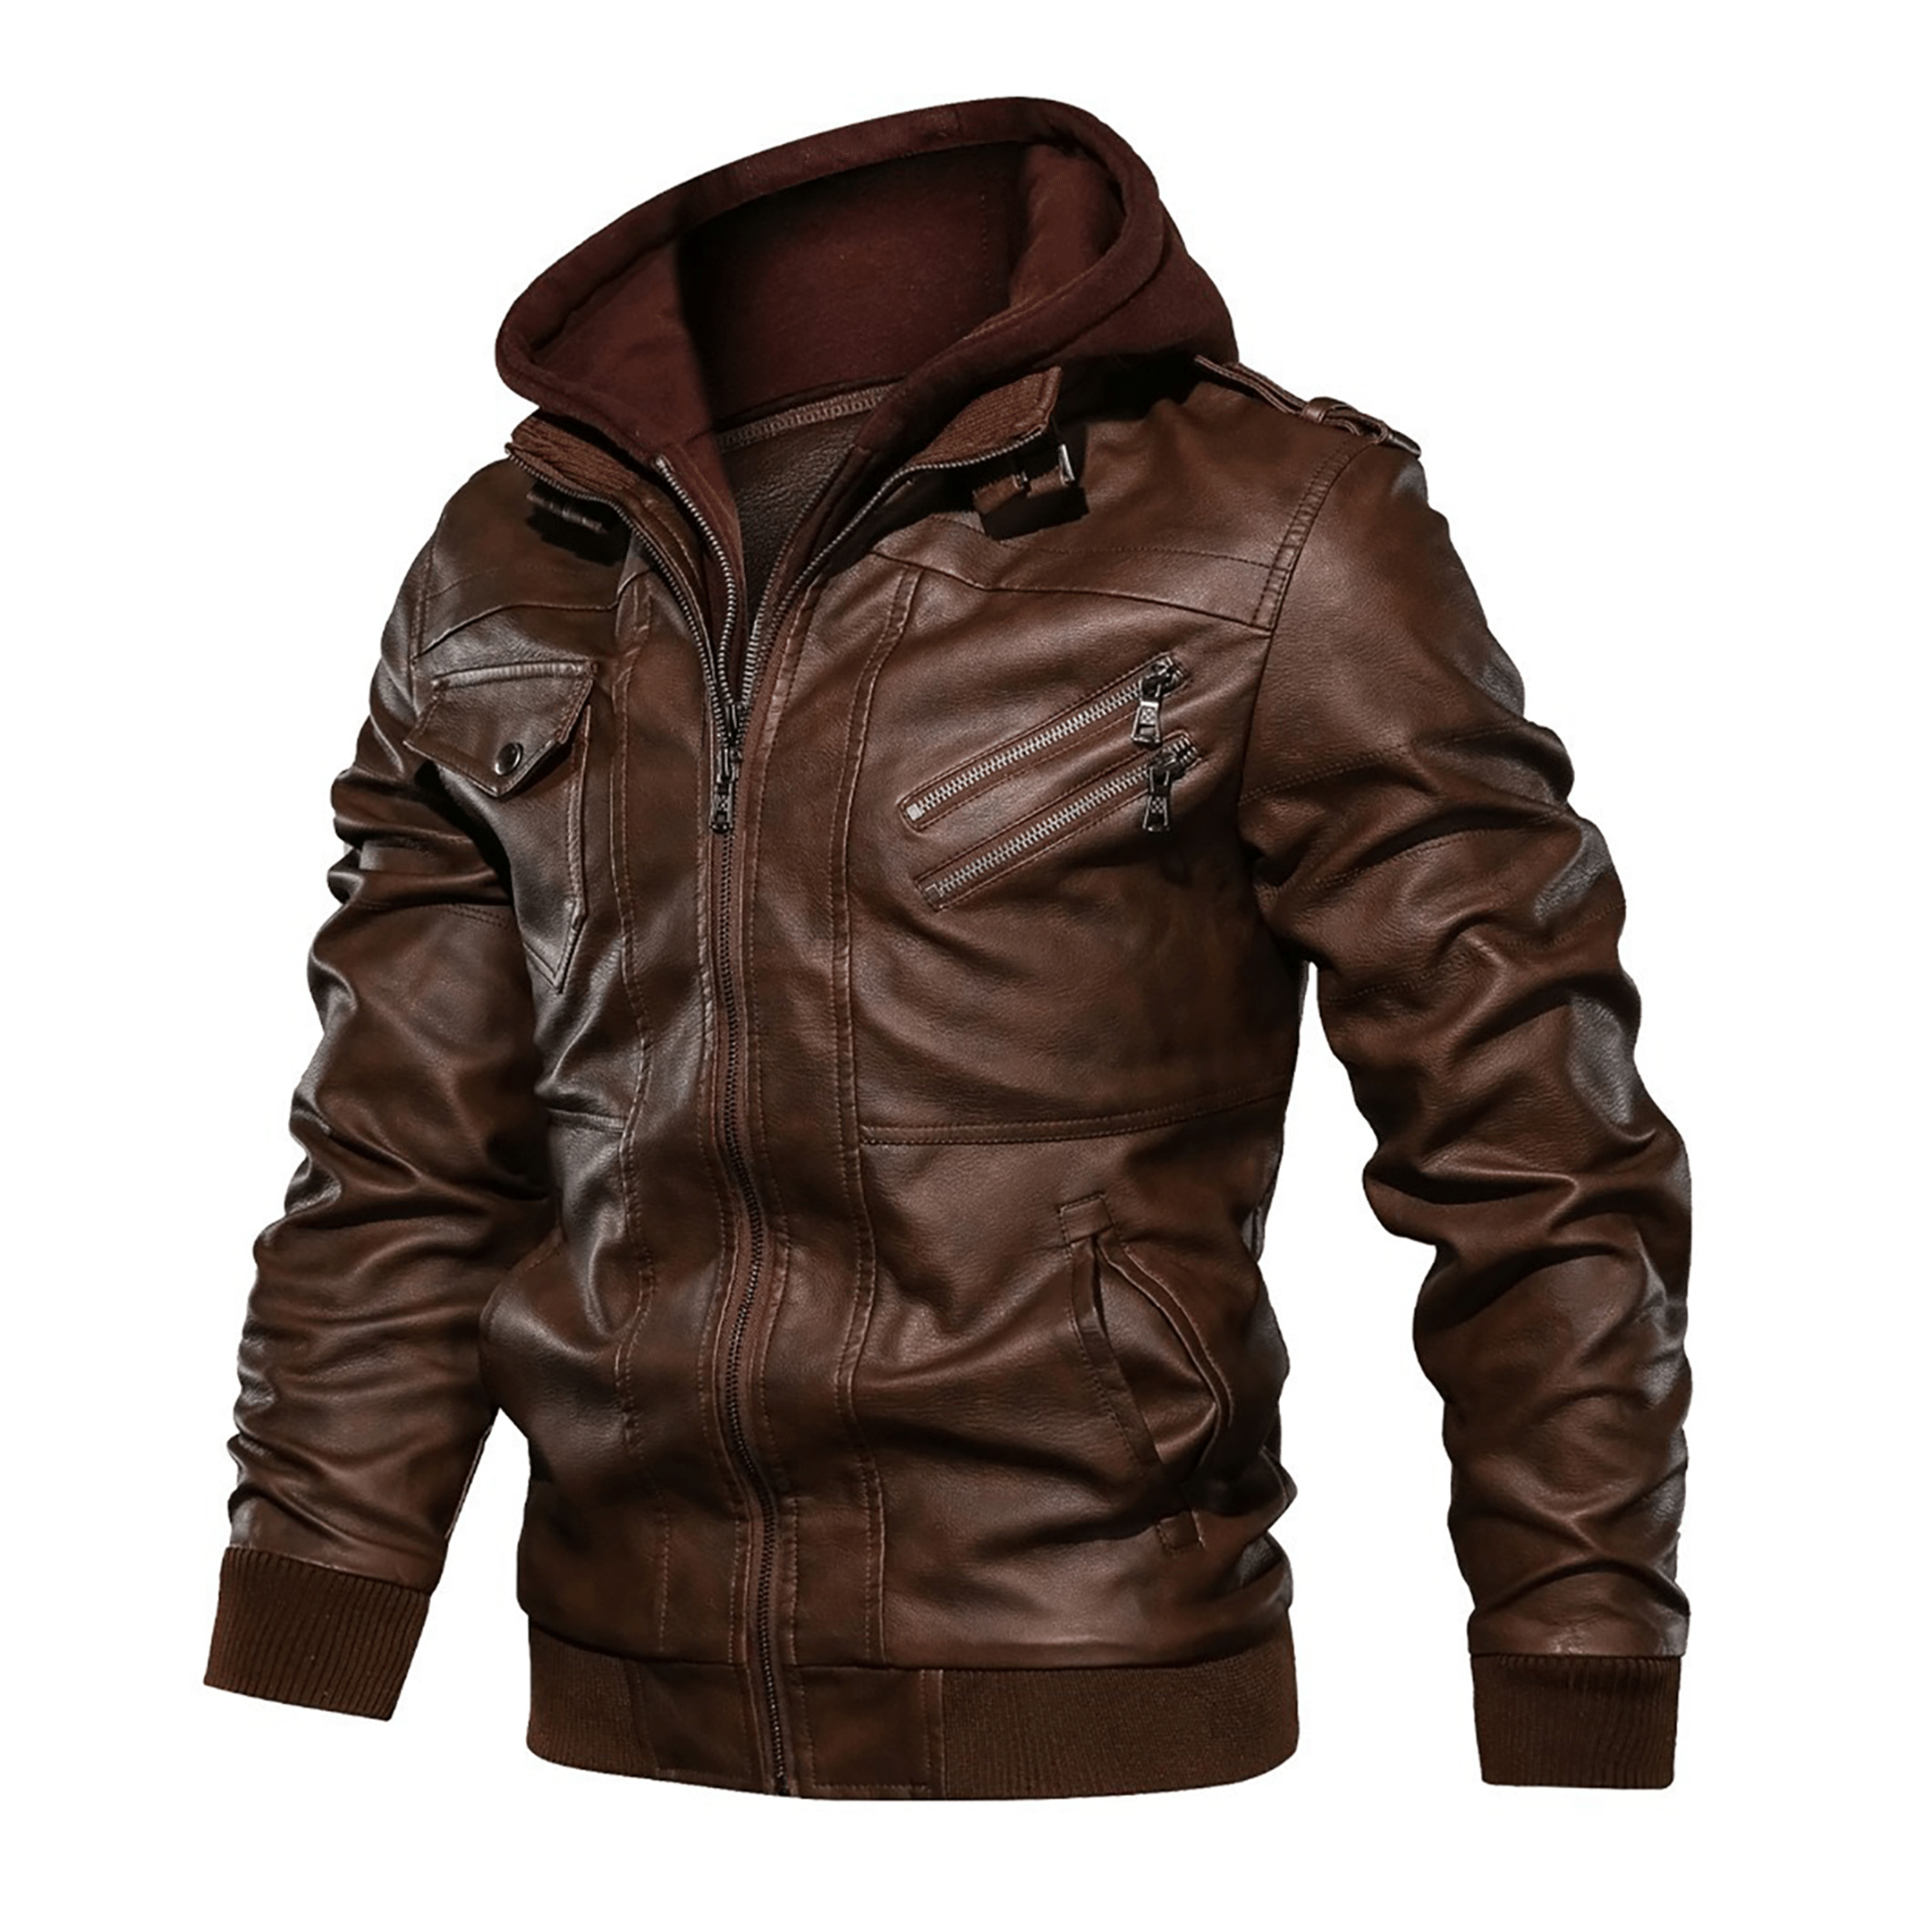 Top leather jackets and latest products 315